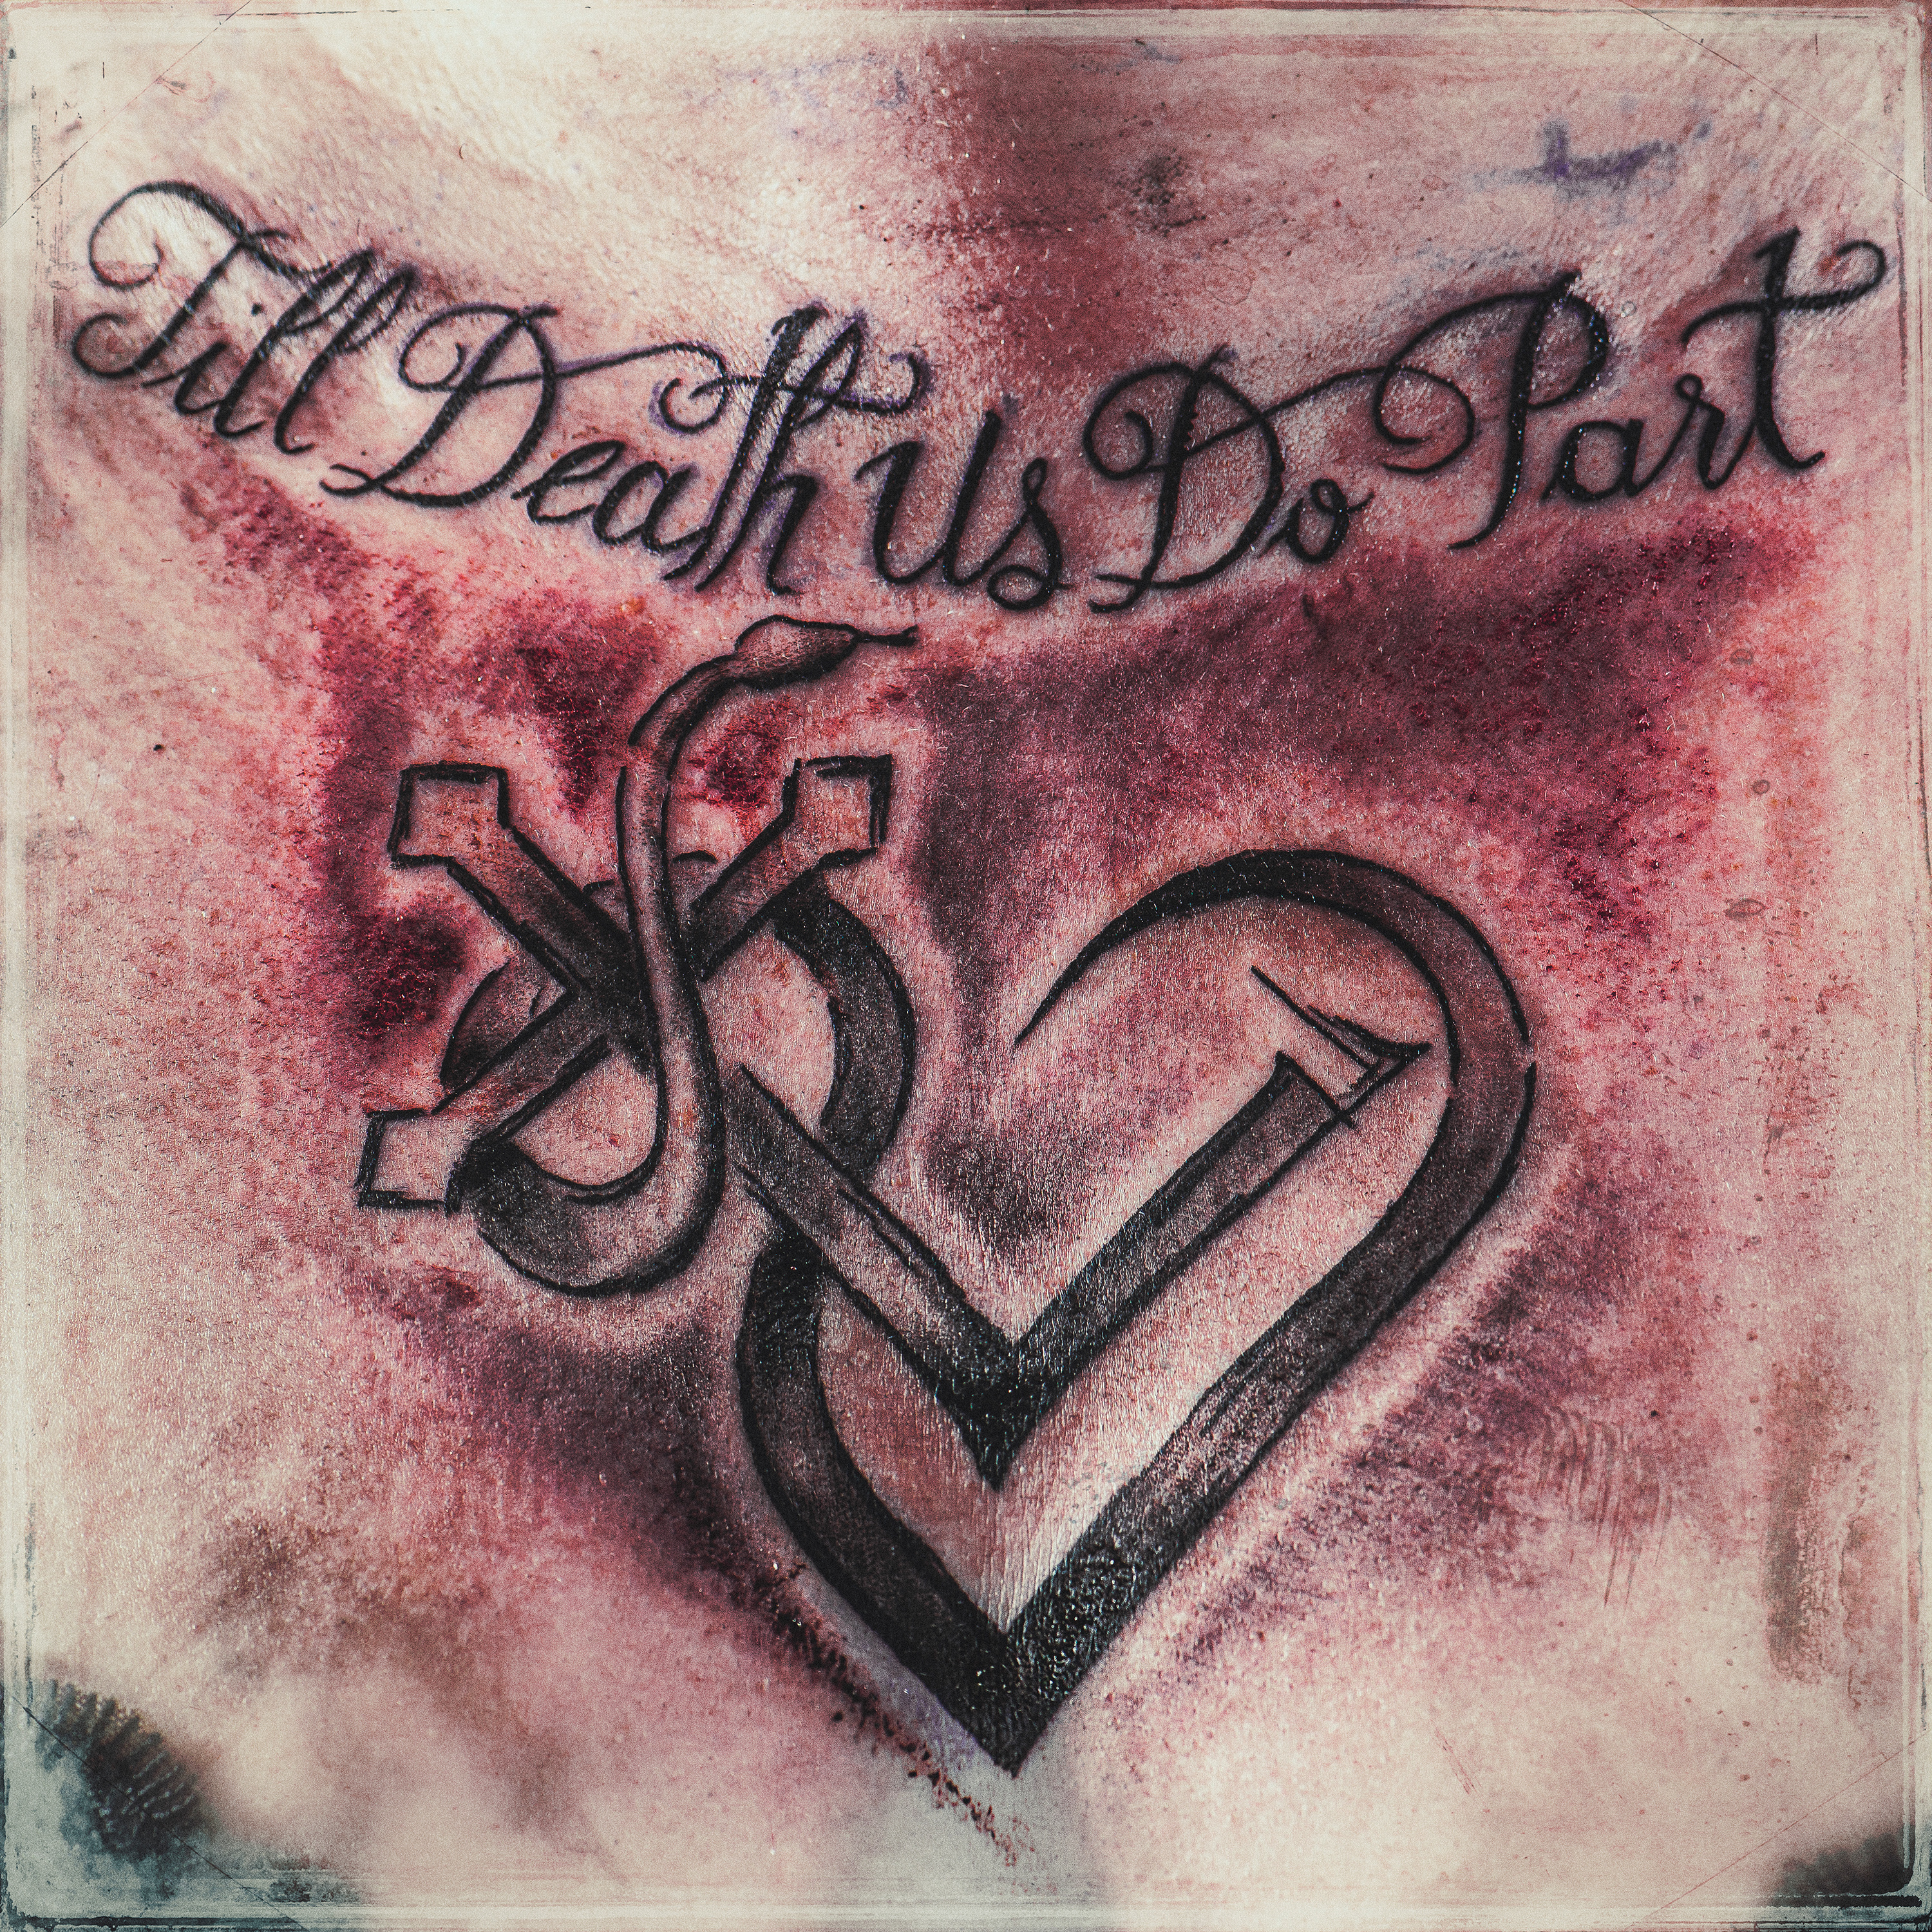 LORD OF THE LOST – Till Death Do Us Part